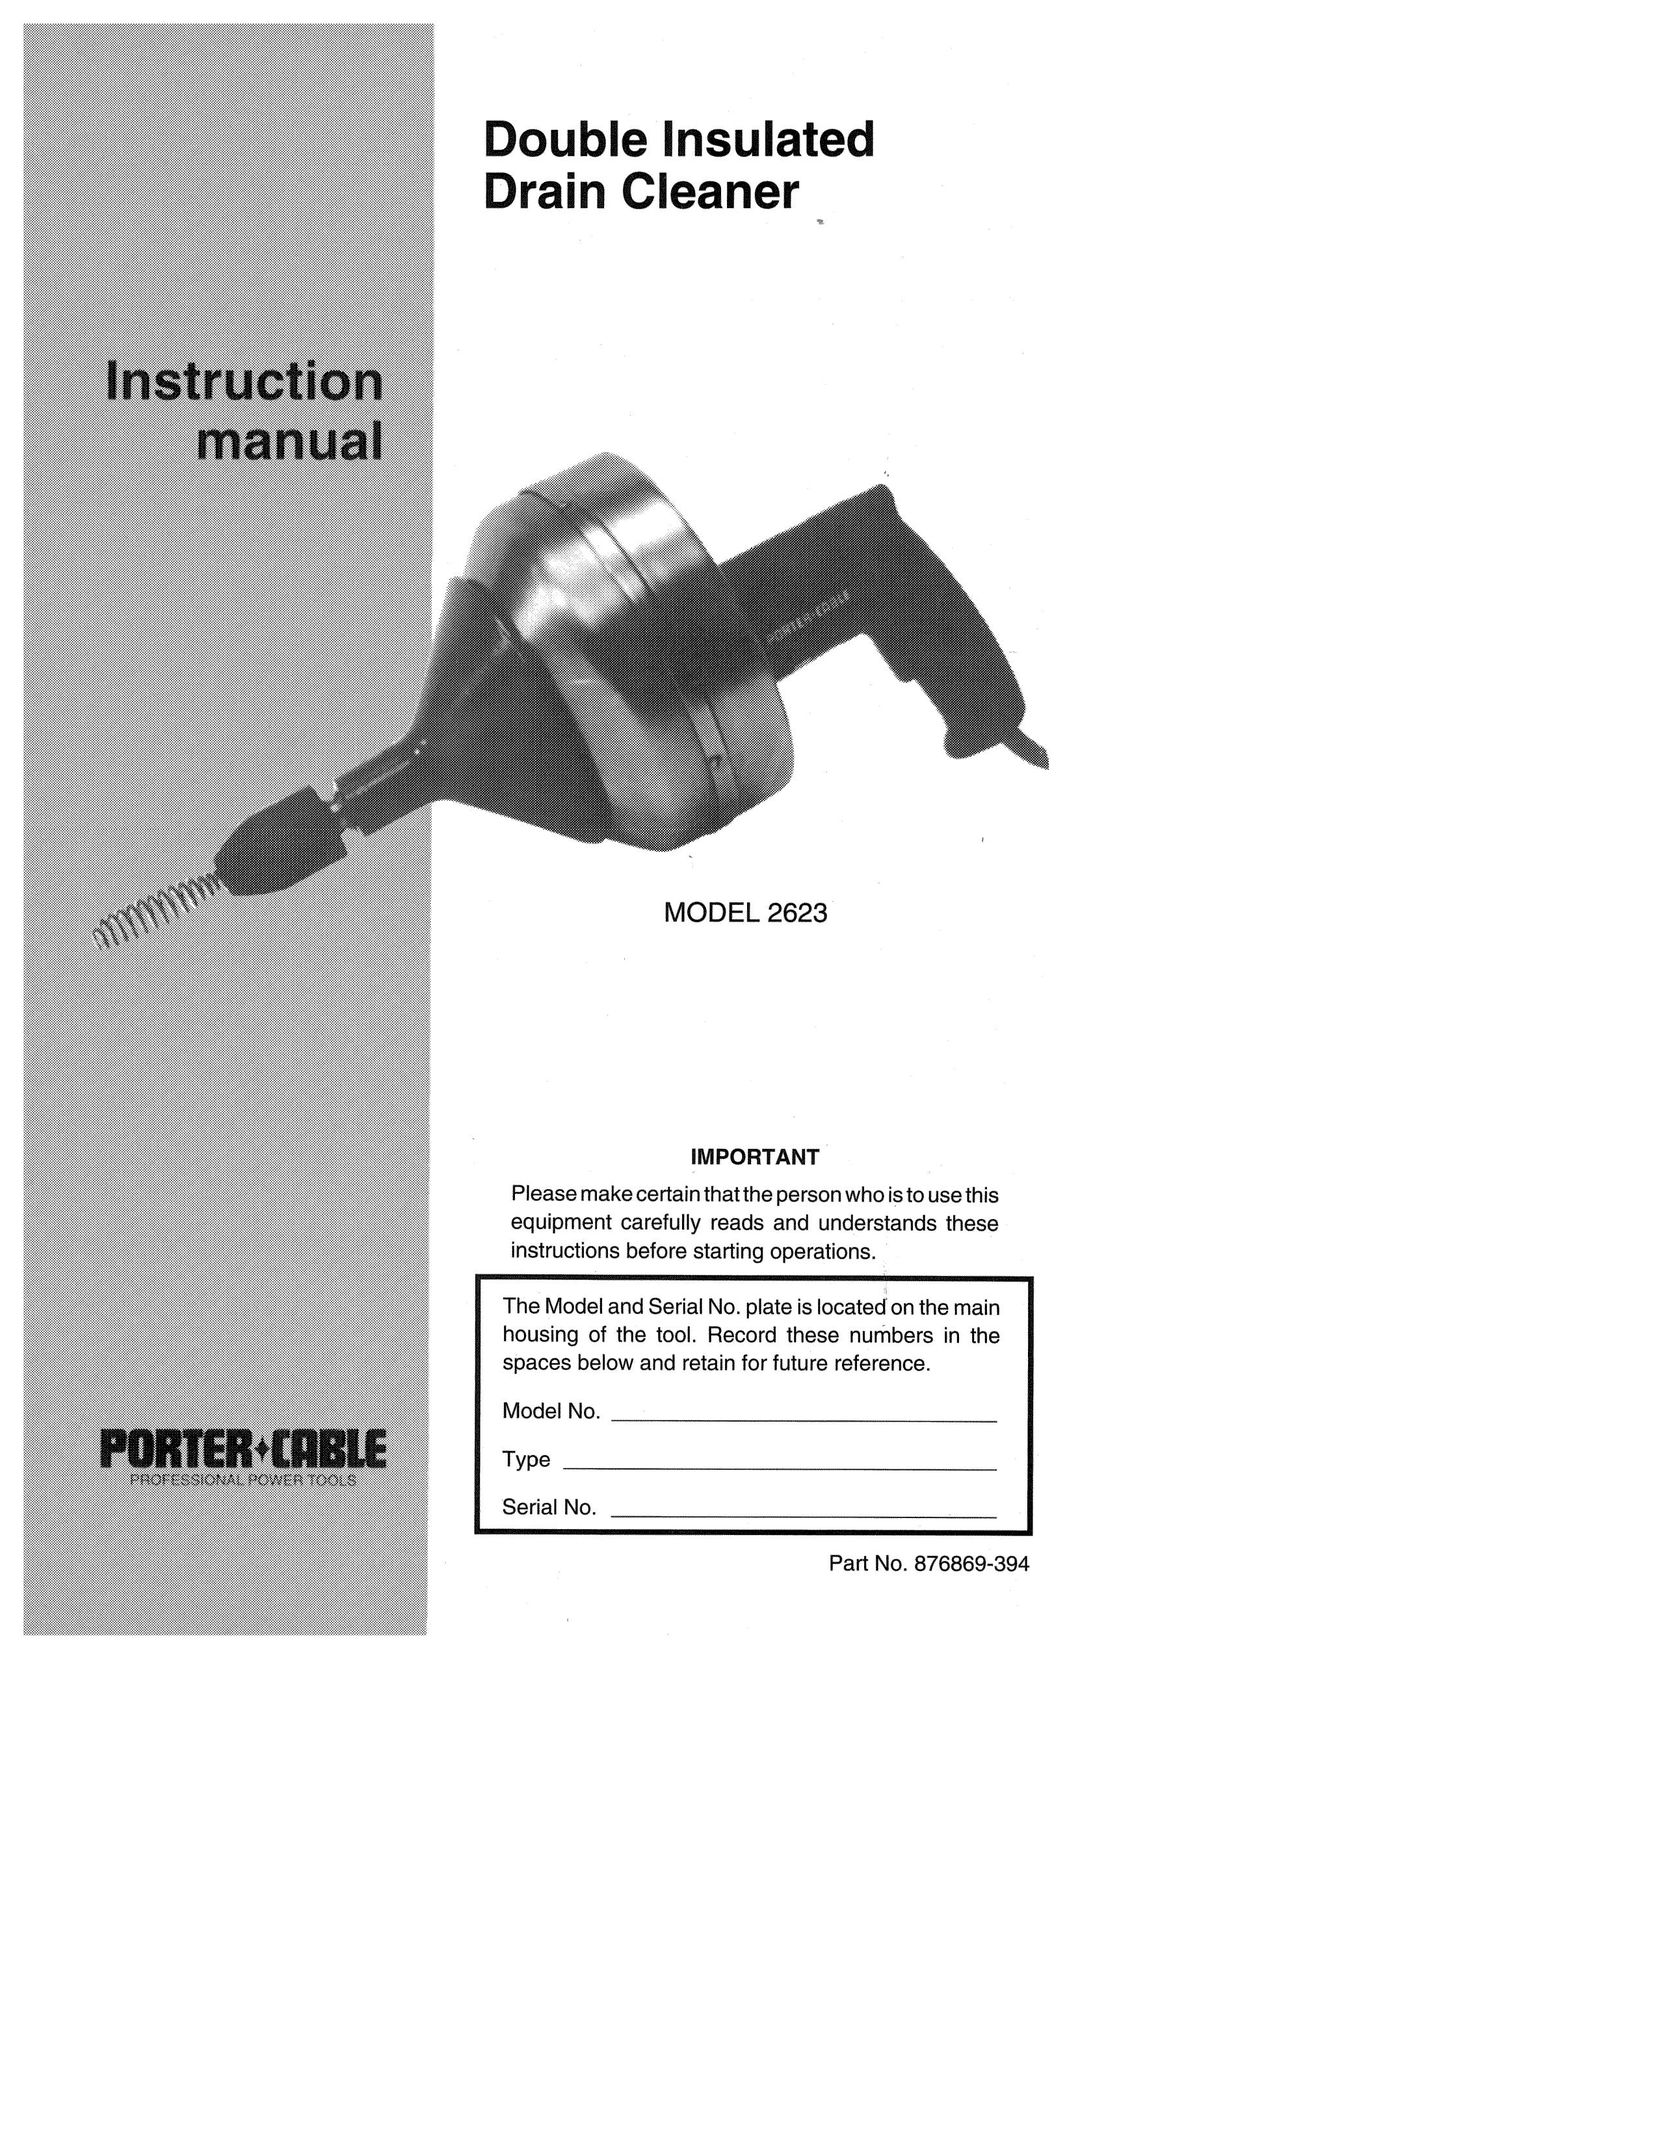 Porter-Cable 2623 Plumbing Product User Manual